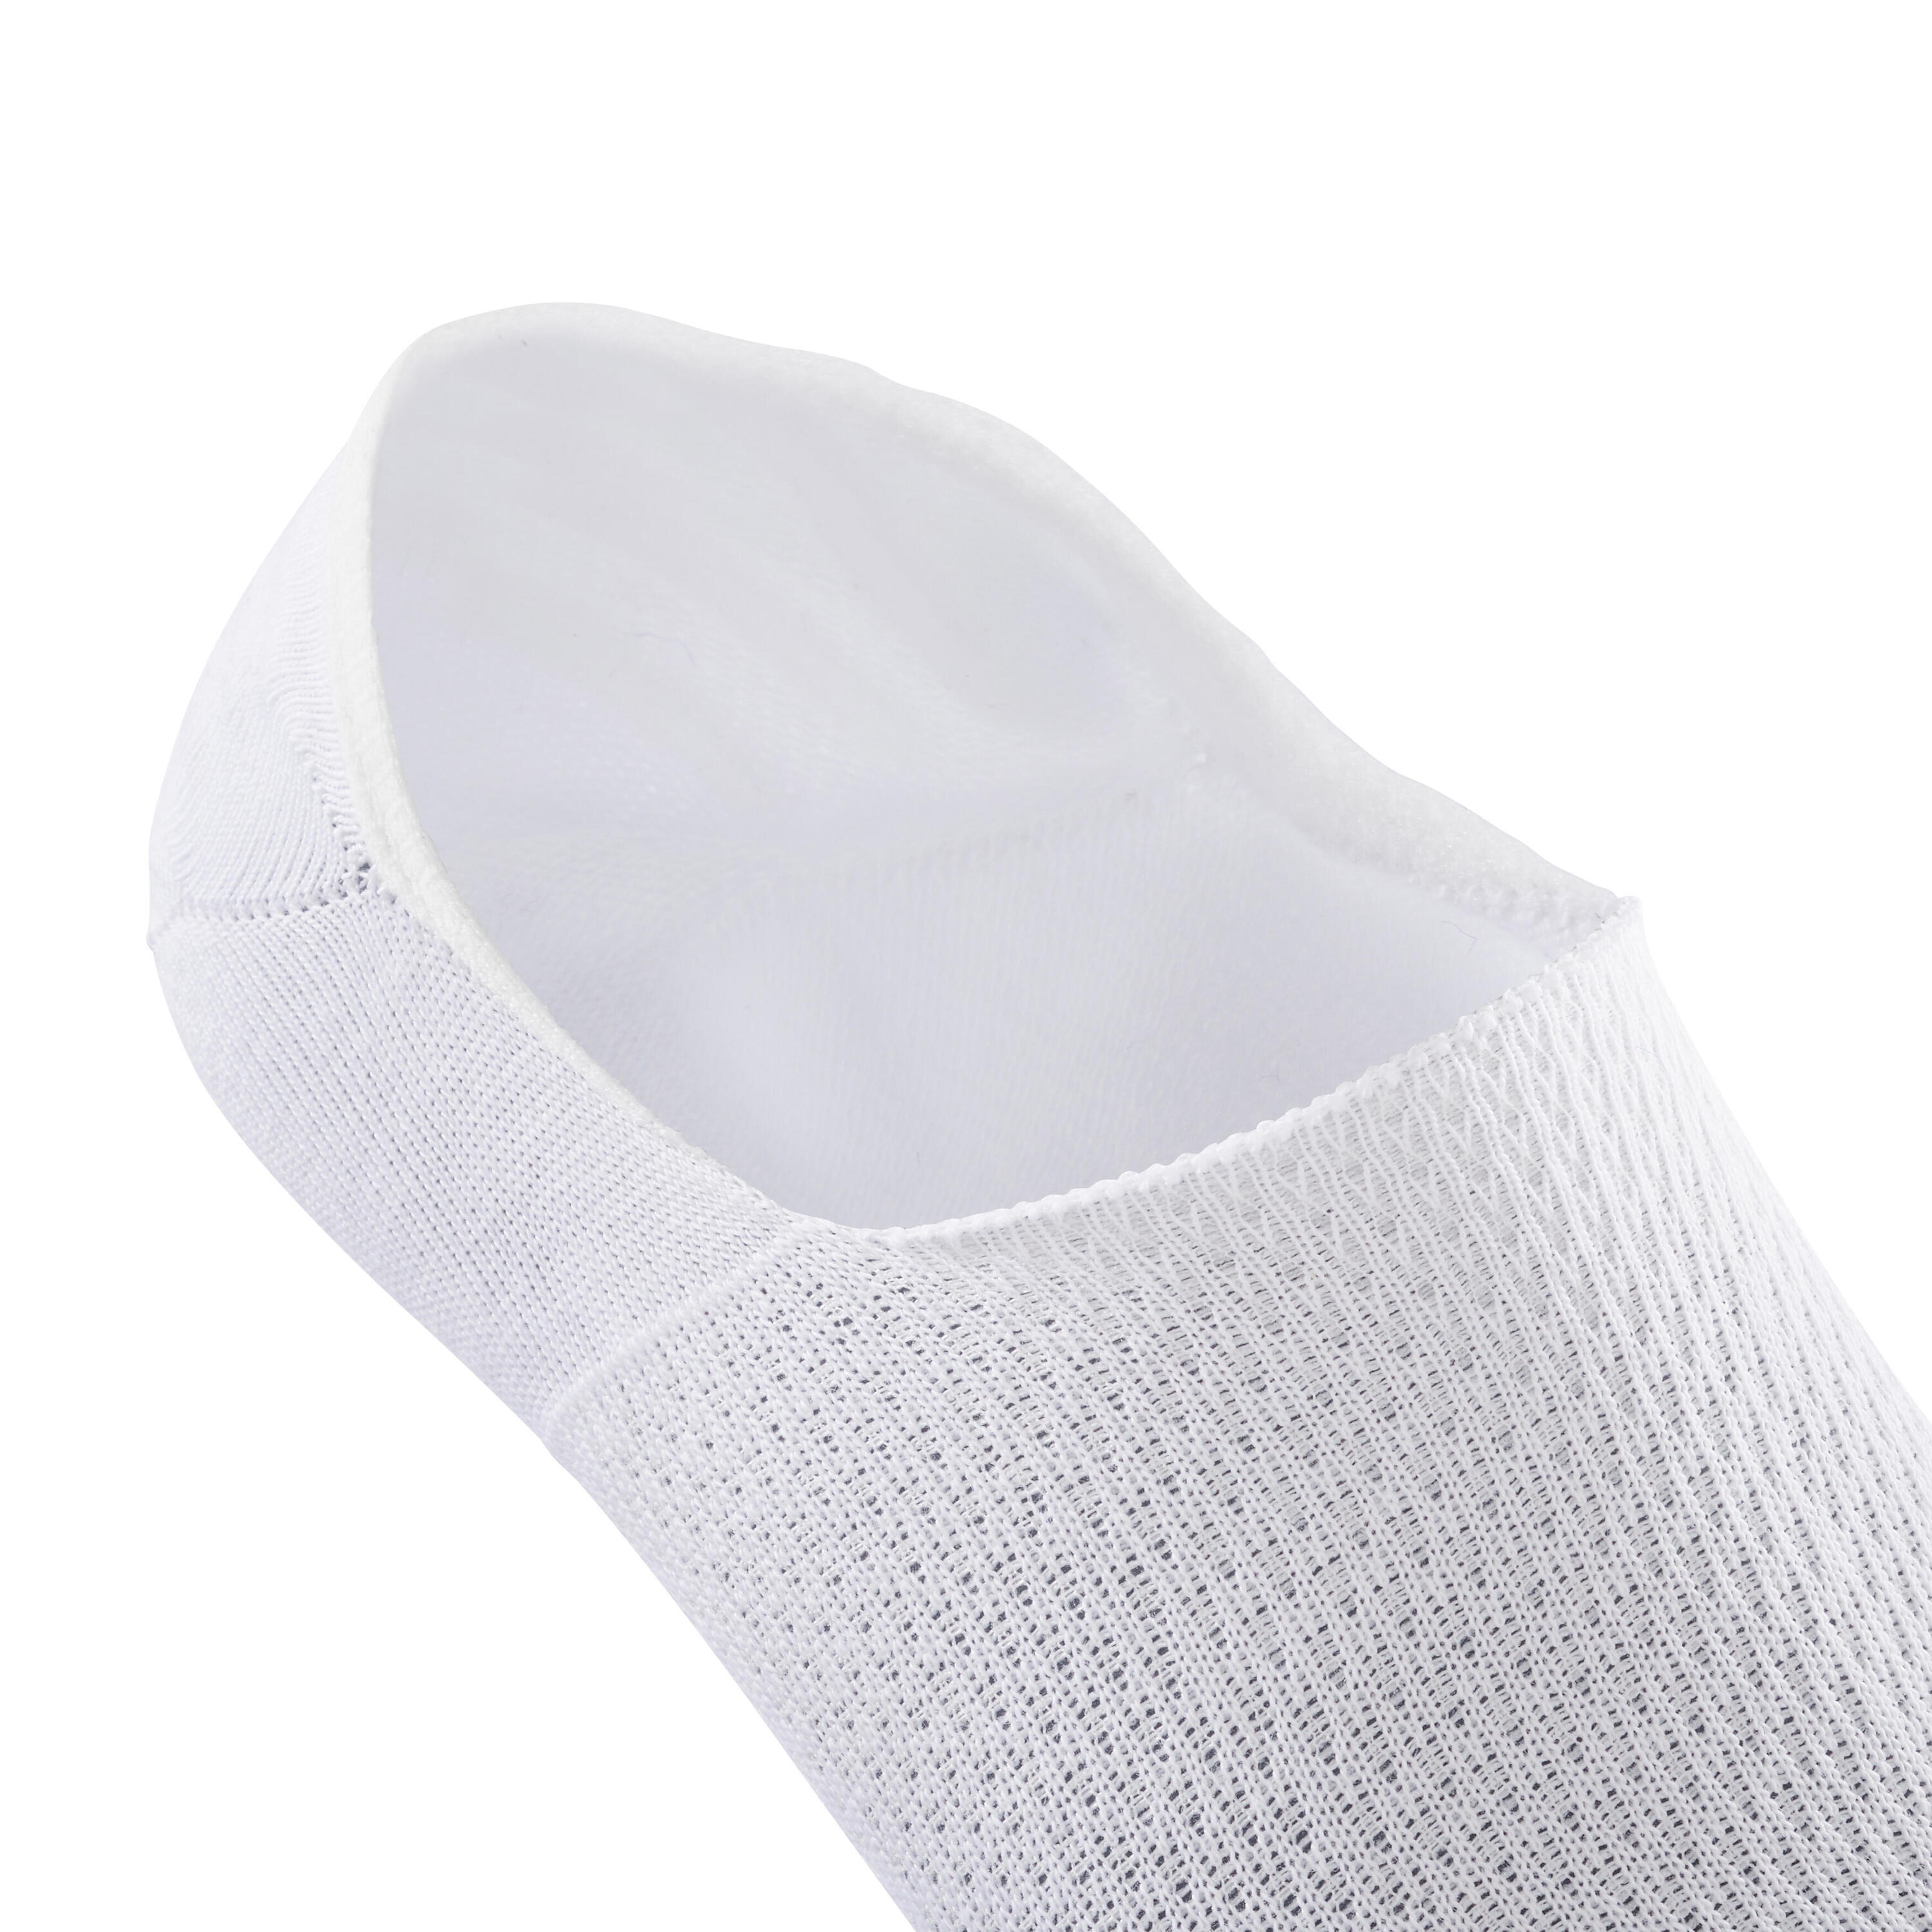 Invisible walking socks - pack of 2 pairs - white/grey 7/9